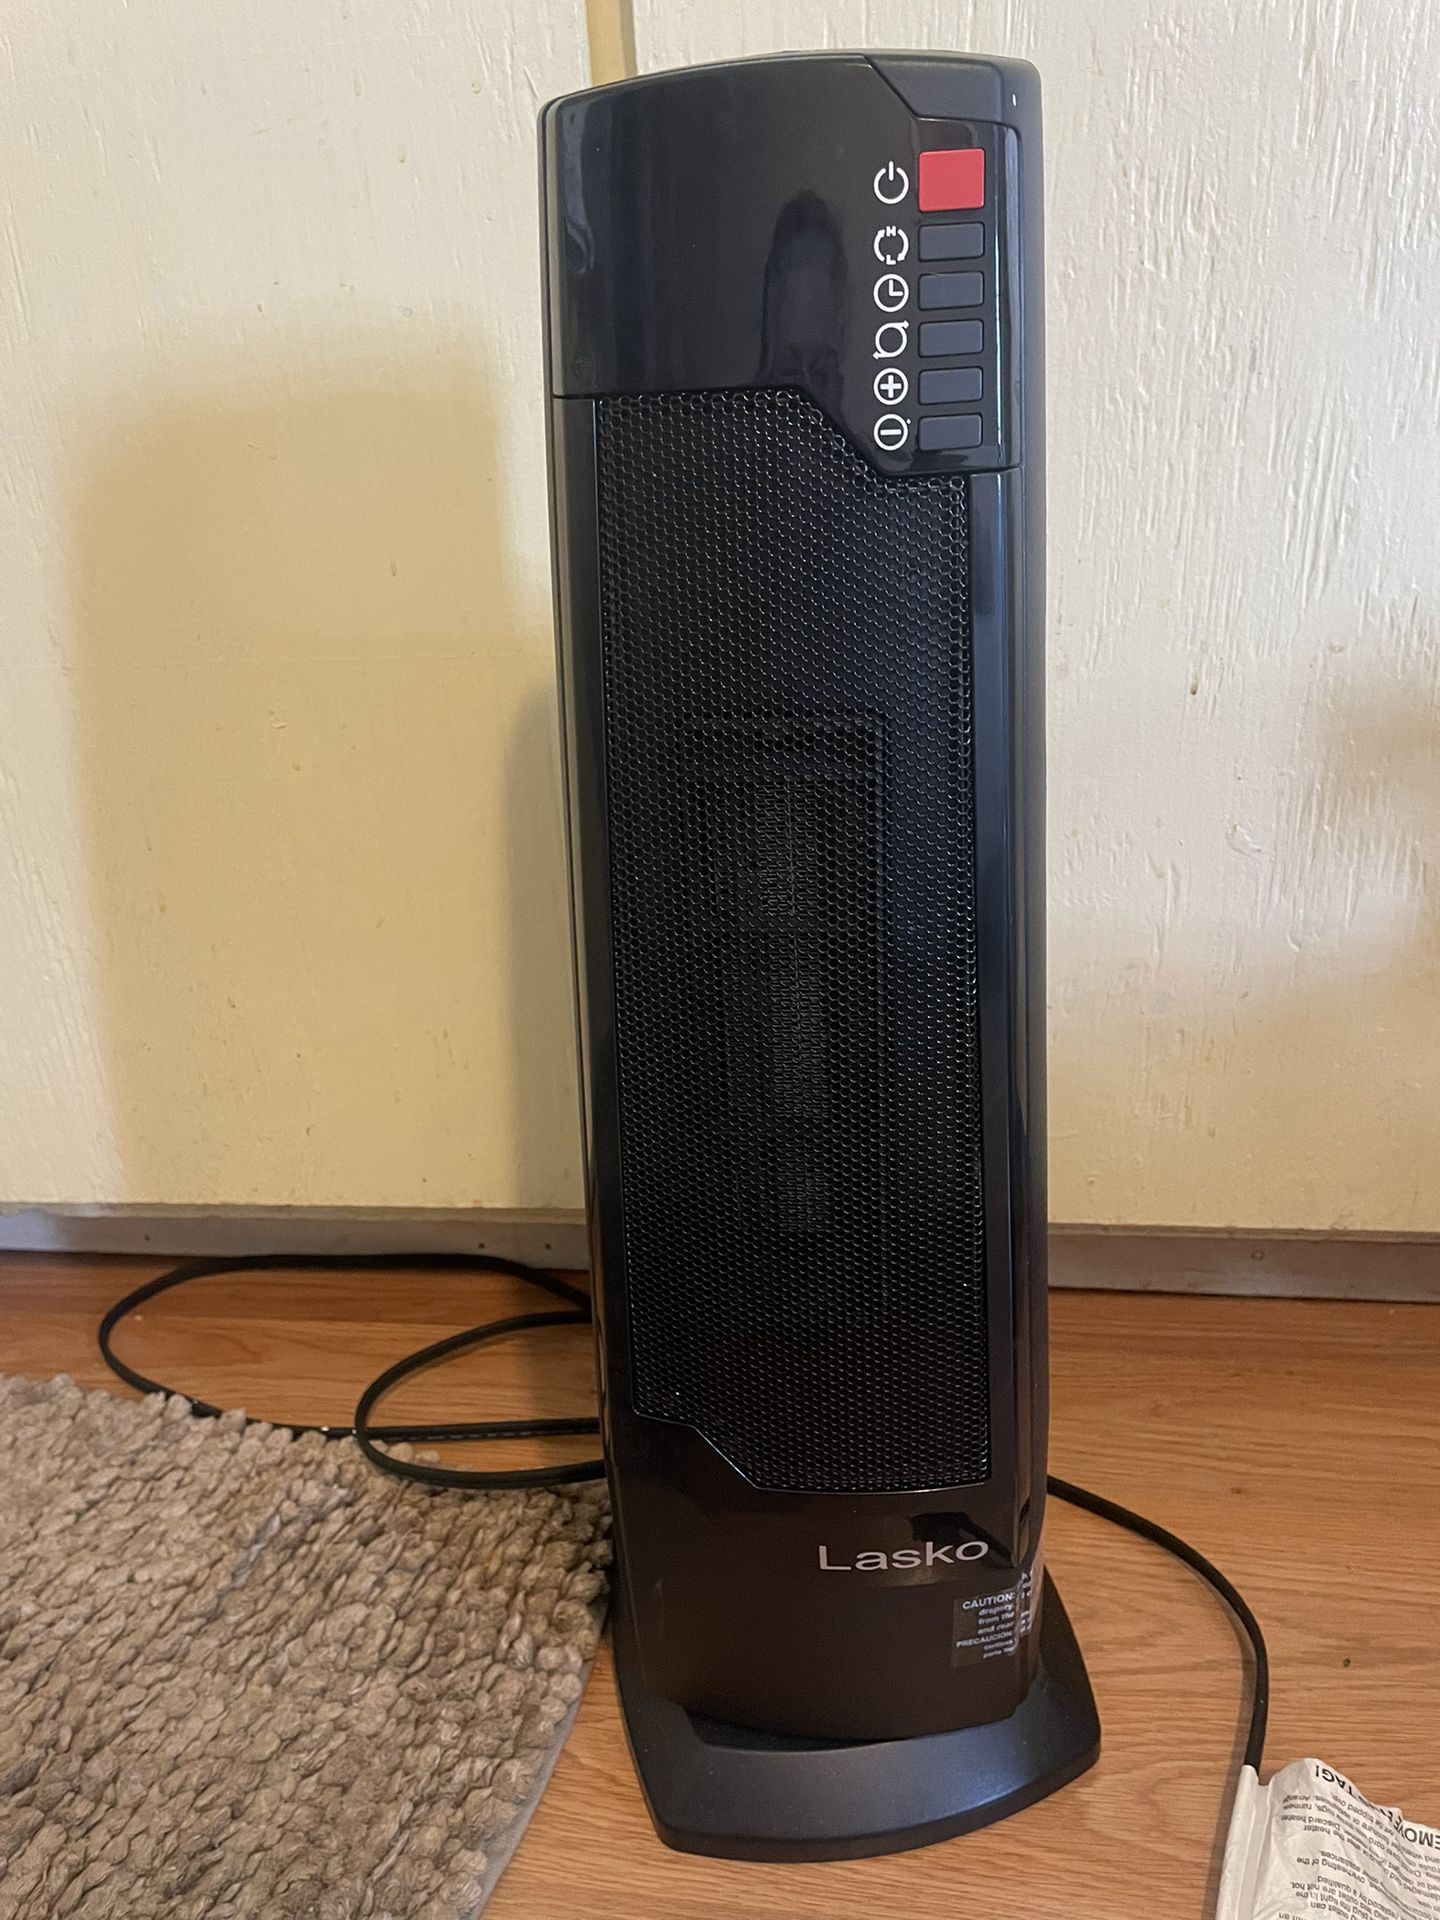 Heater, Great Oscillating Space Heater With Lots Of Safety Features, And A Remote Control That Has Timer And Automatic Shut Off.branford